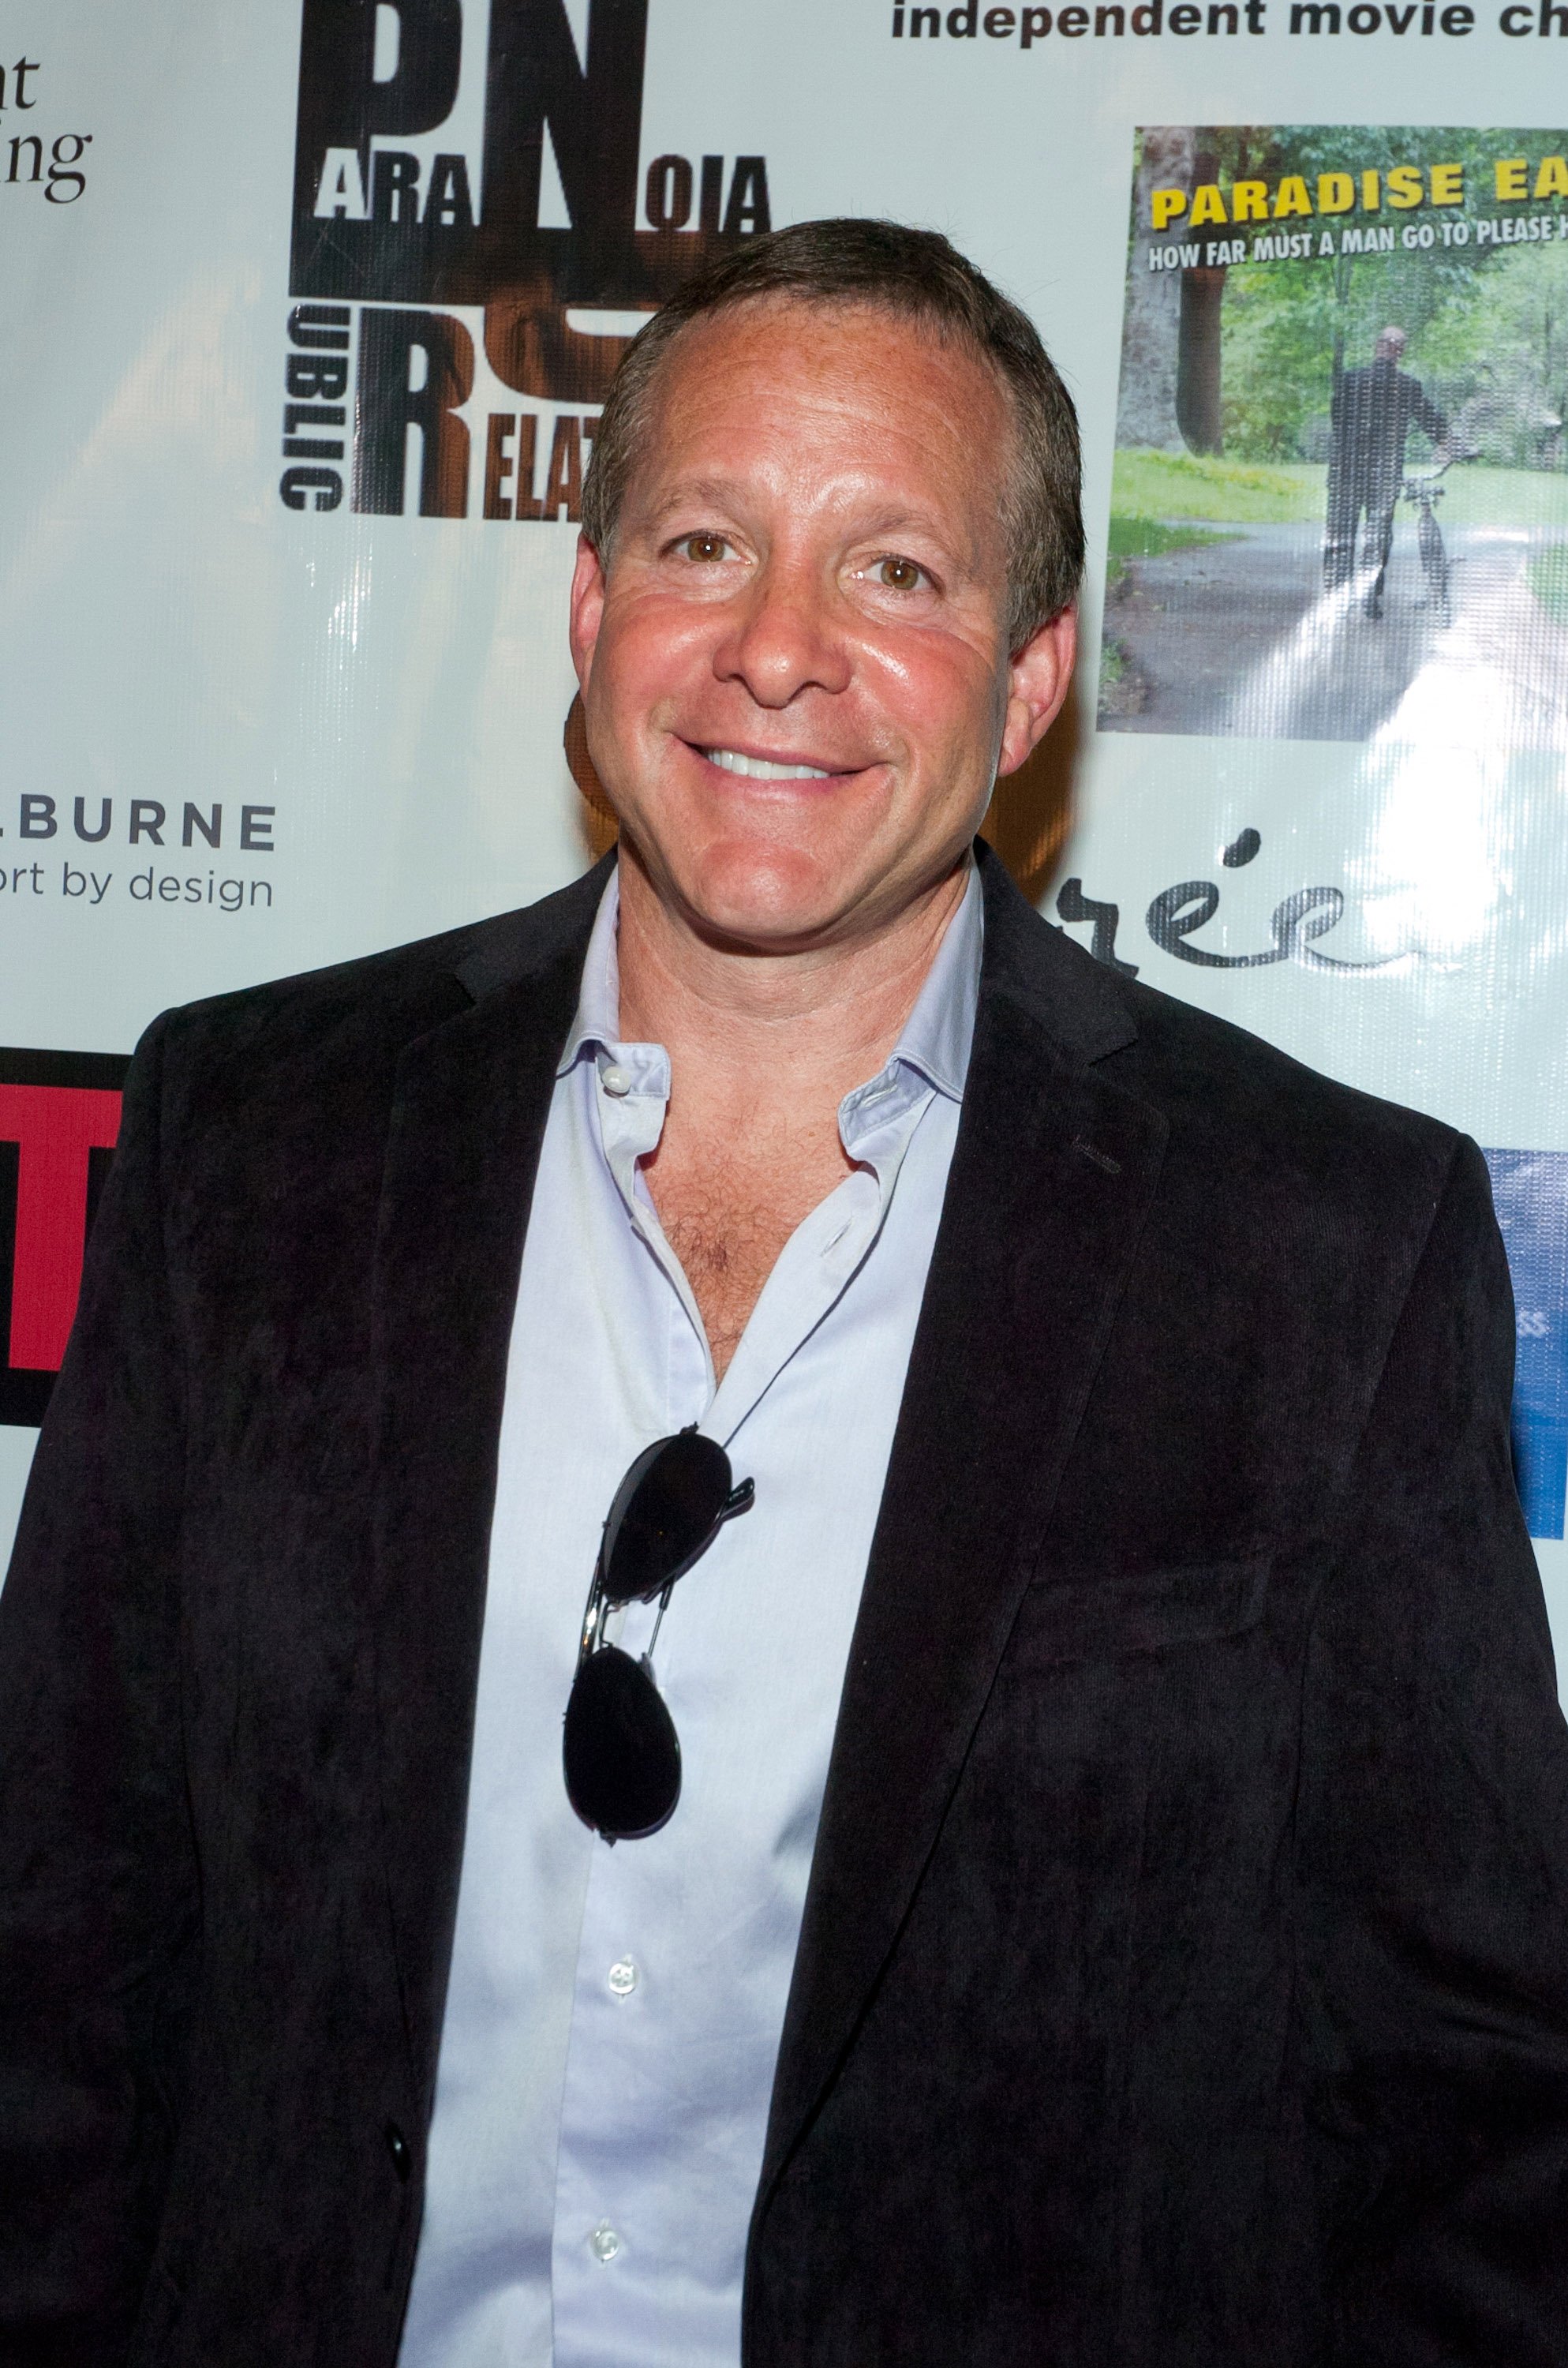 Actor Steve Guttenberg during the premiere of "A Novel Romance" at the 2011 New York Independent Film Festival held at the Quad Cinema on May 5, 2011 in New York City. | Source: Getty Images